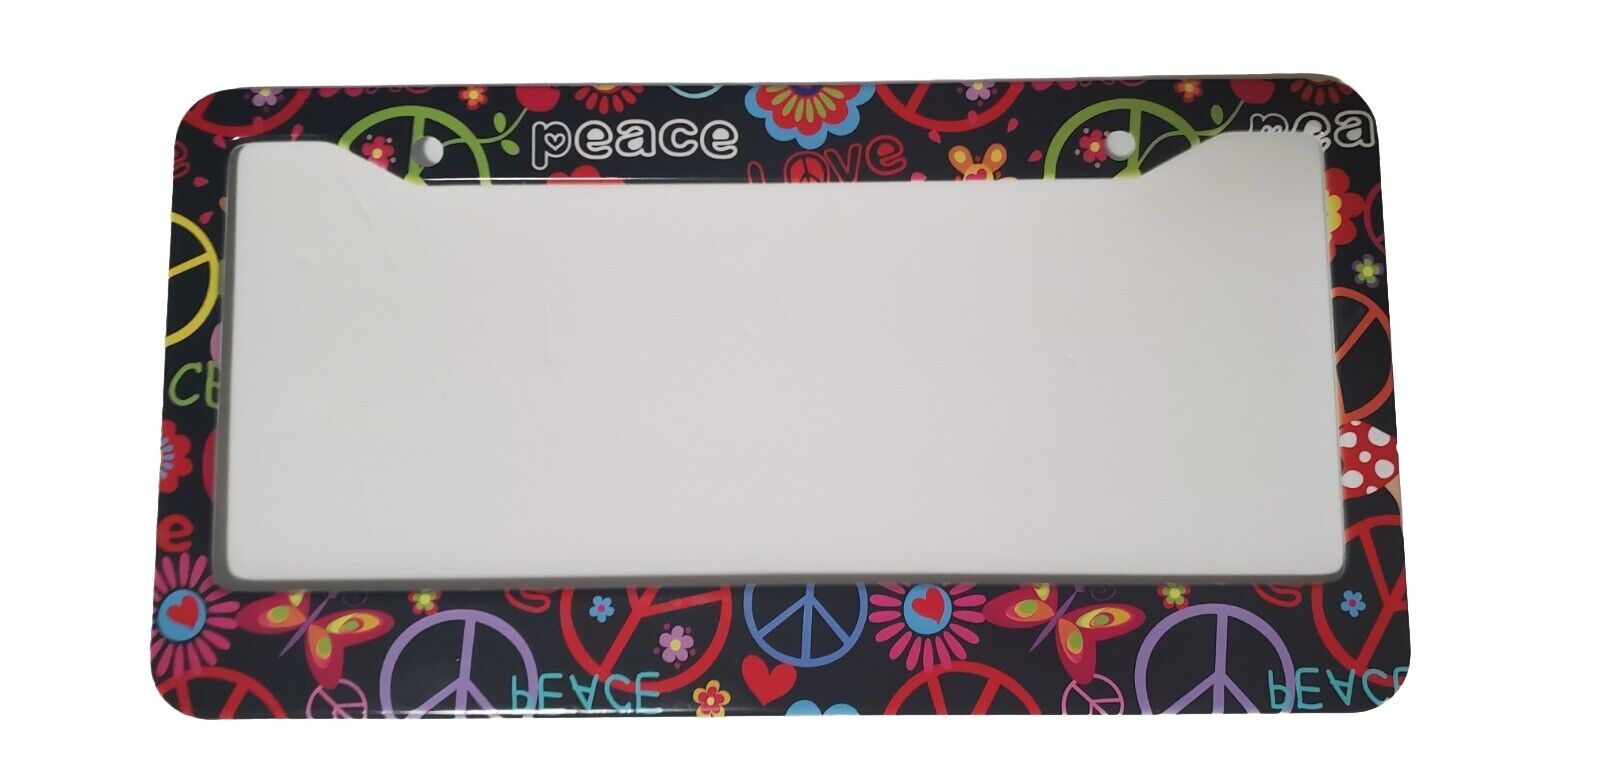 Hippie~Peace Sign Steel Metal License Plate Frame (Very Unique)